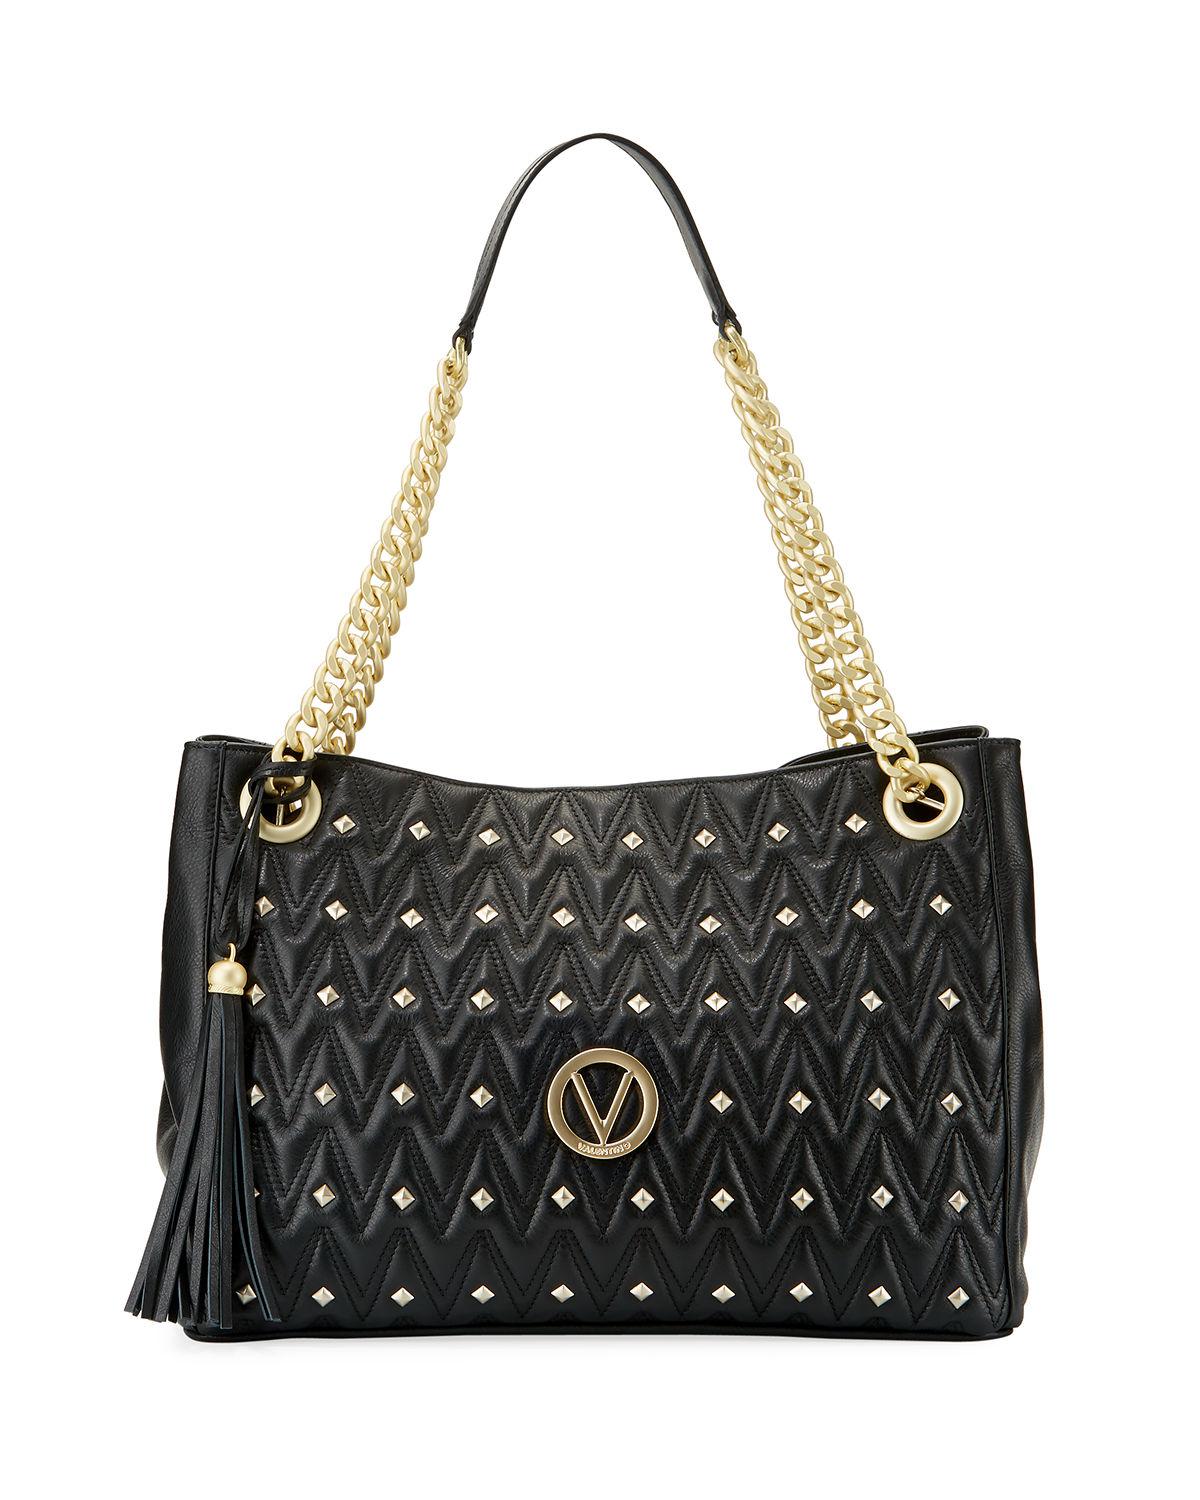 Valentino By Mario Valentino Verra D Quilted Sauvage Leather Tote Bag in Black - Lyst